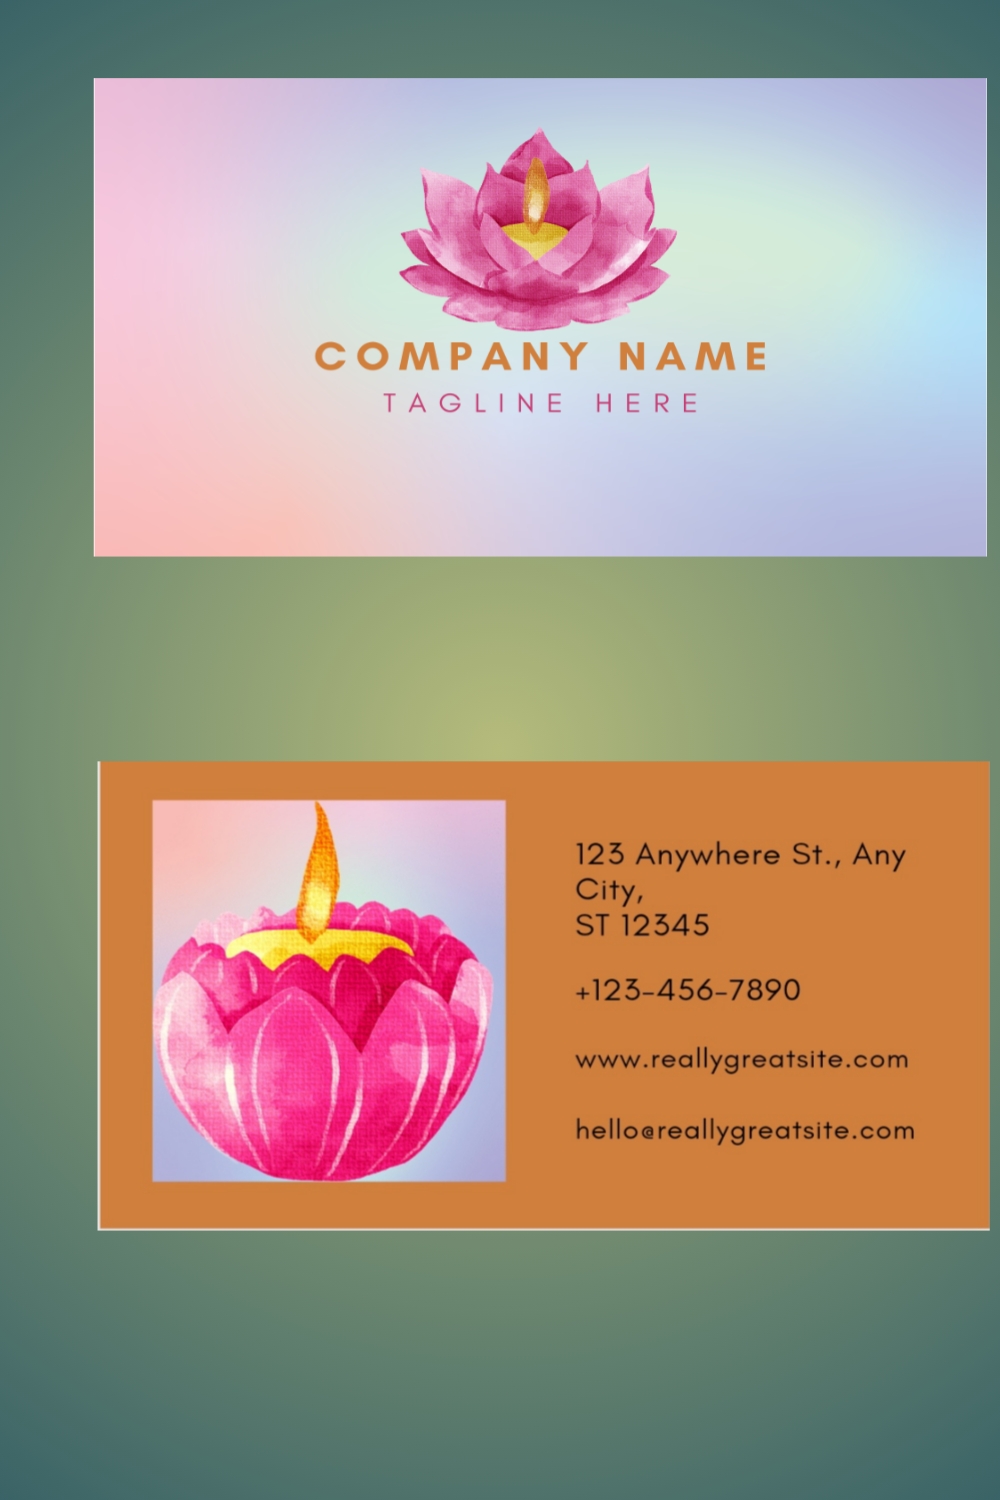 Simple and Basic Business Card Pinterest Collage image.